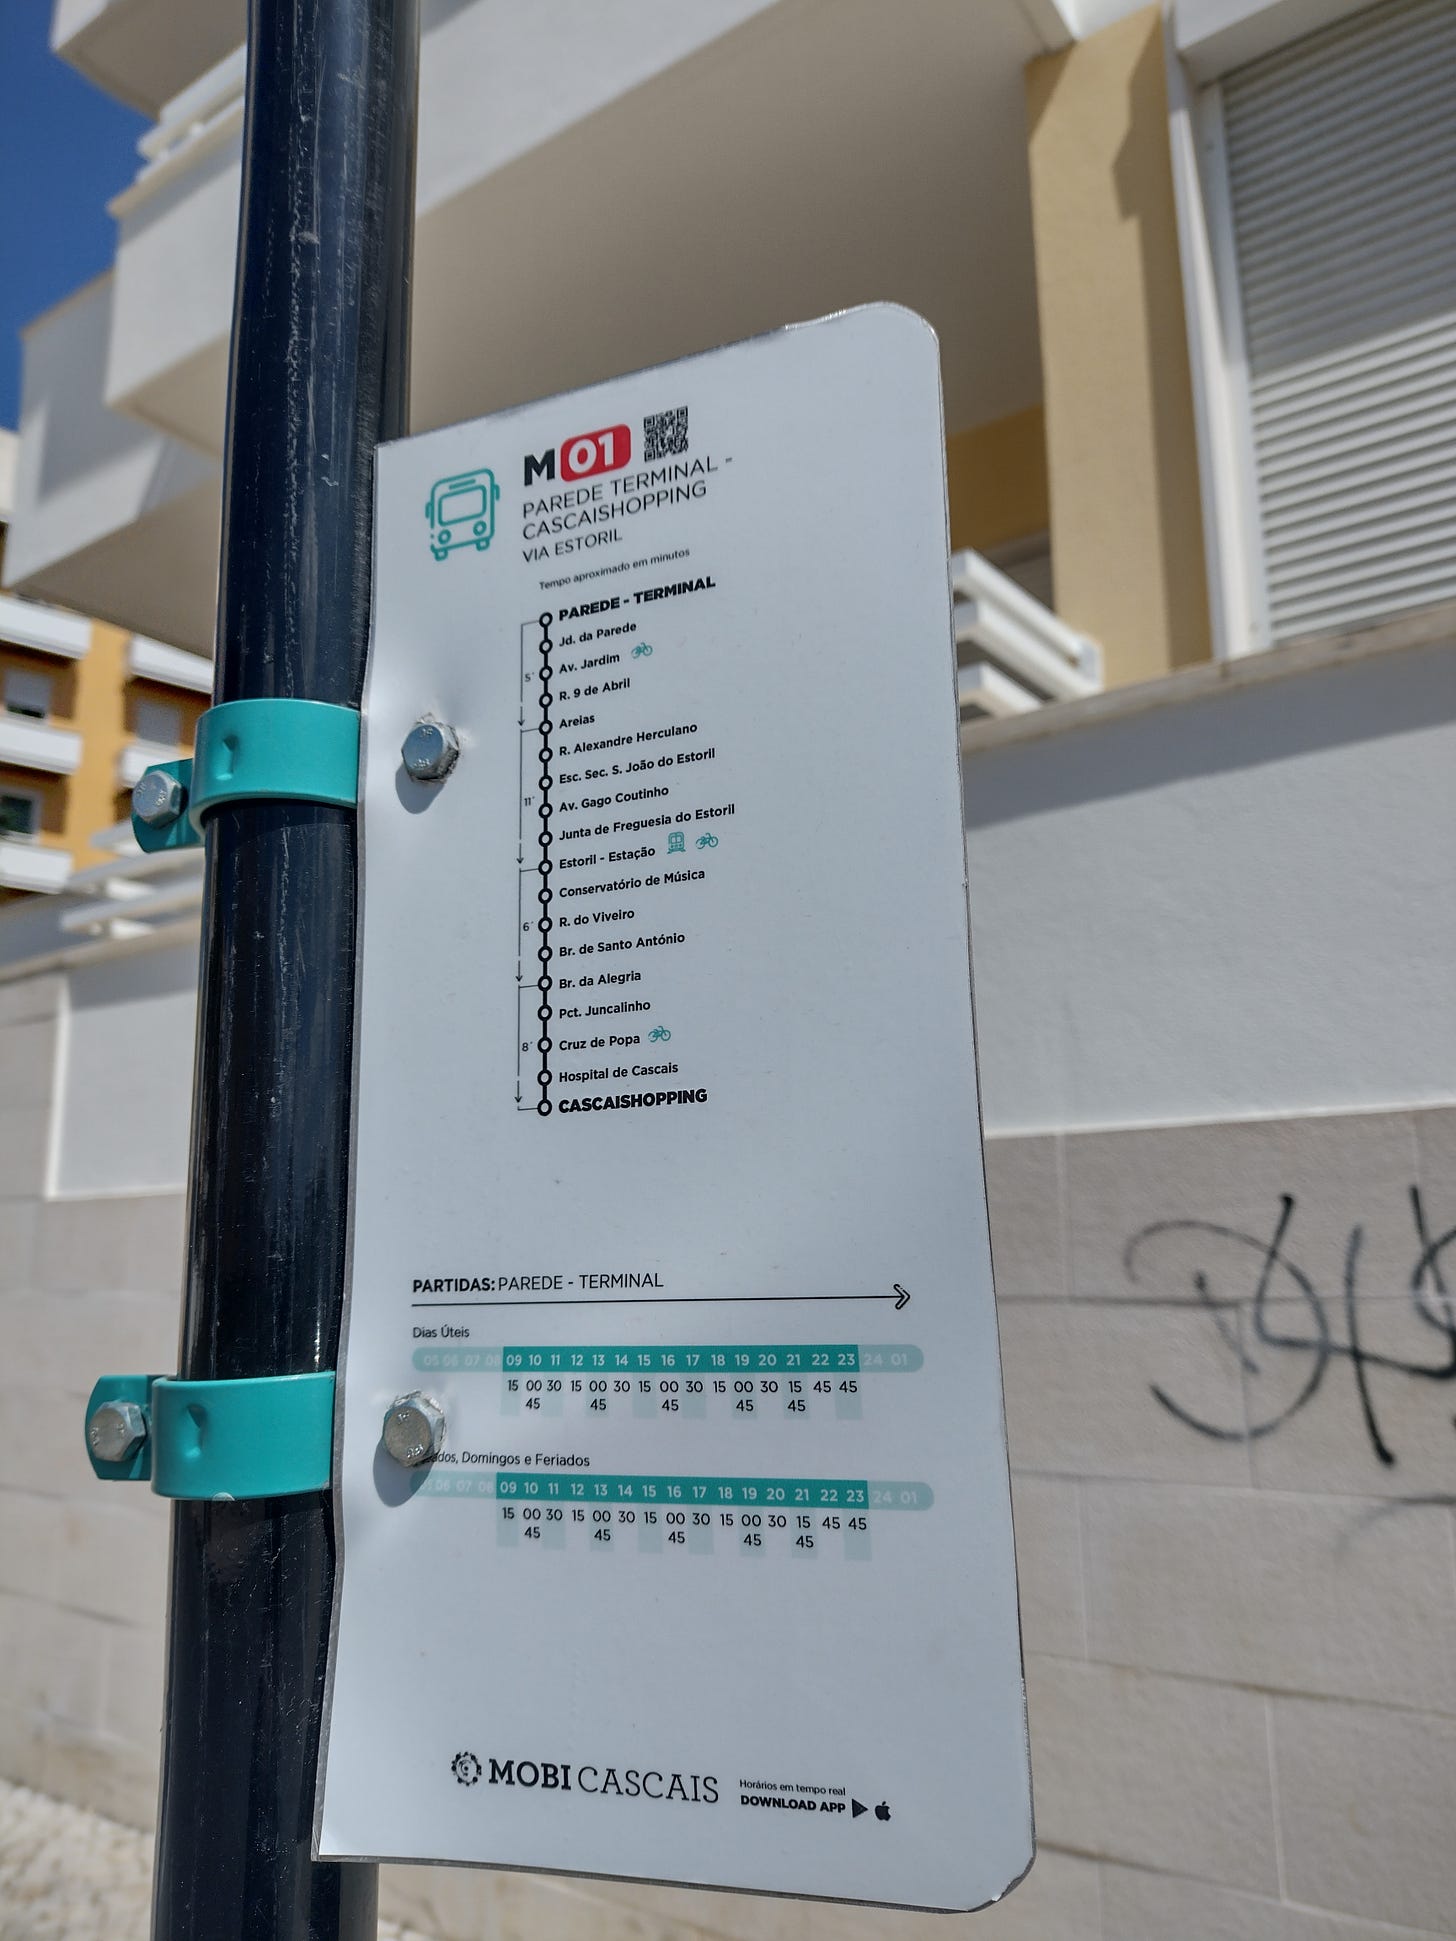 Bus Schedule on a Pole